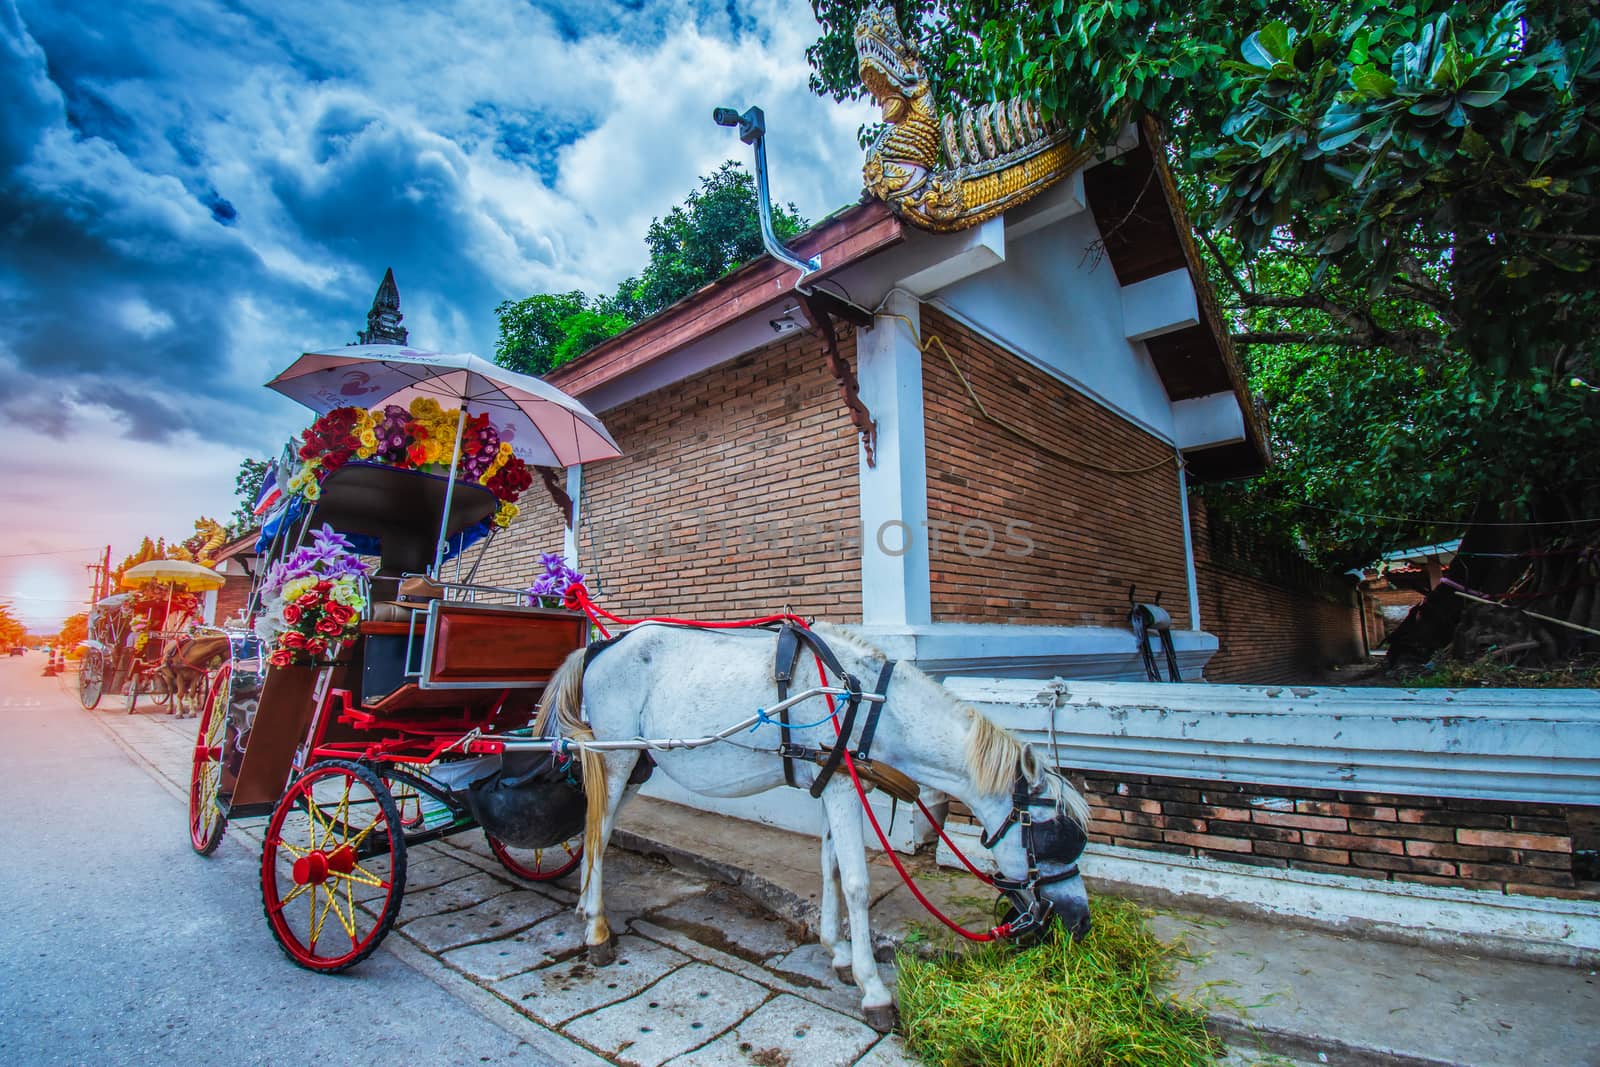 Carriages in front of Wat Phra That Lampang Luang, designed for tourist services